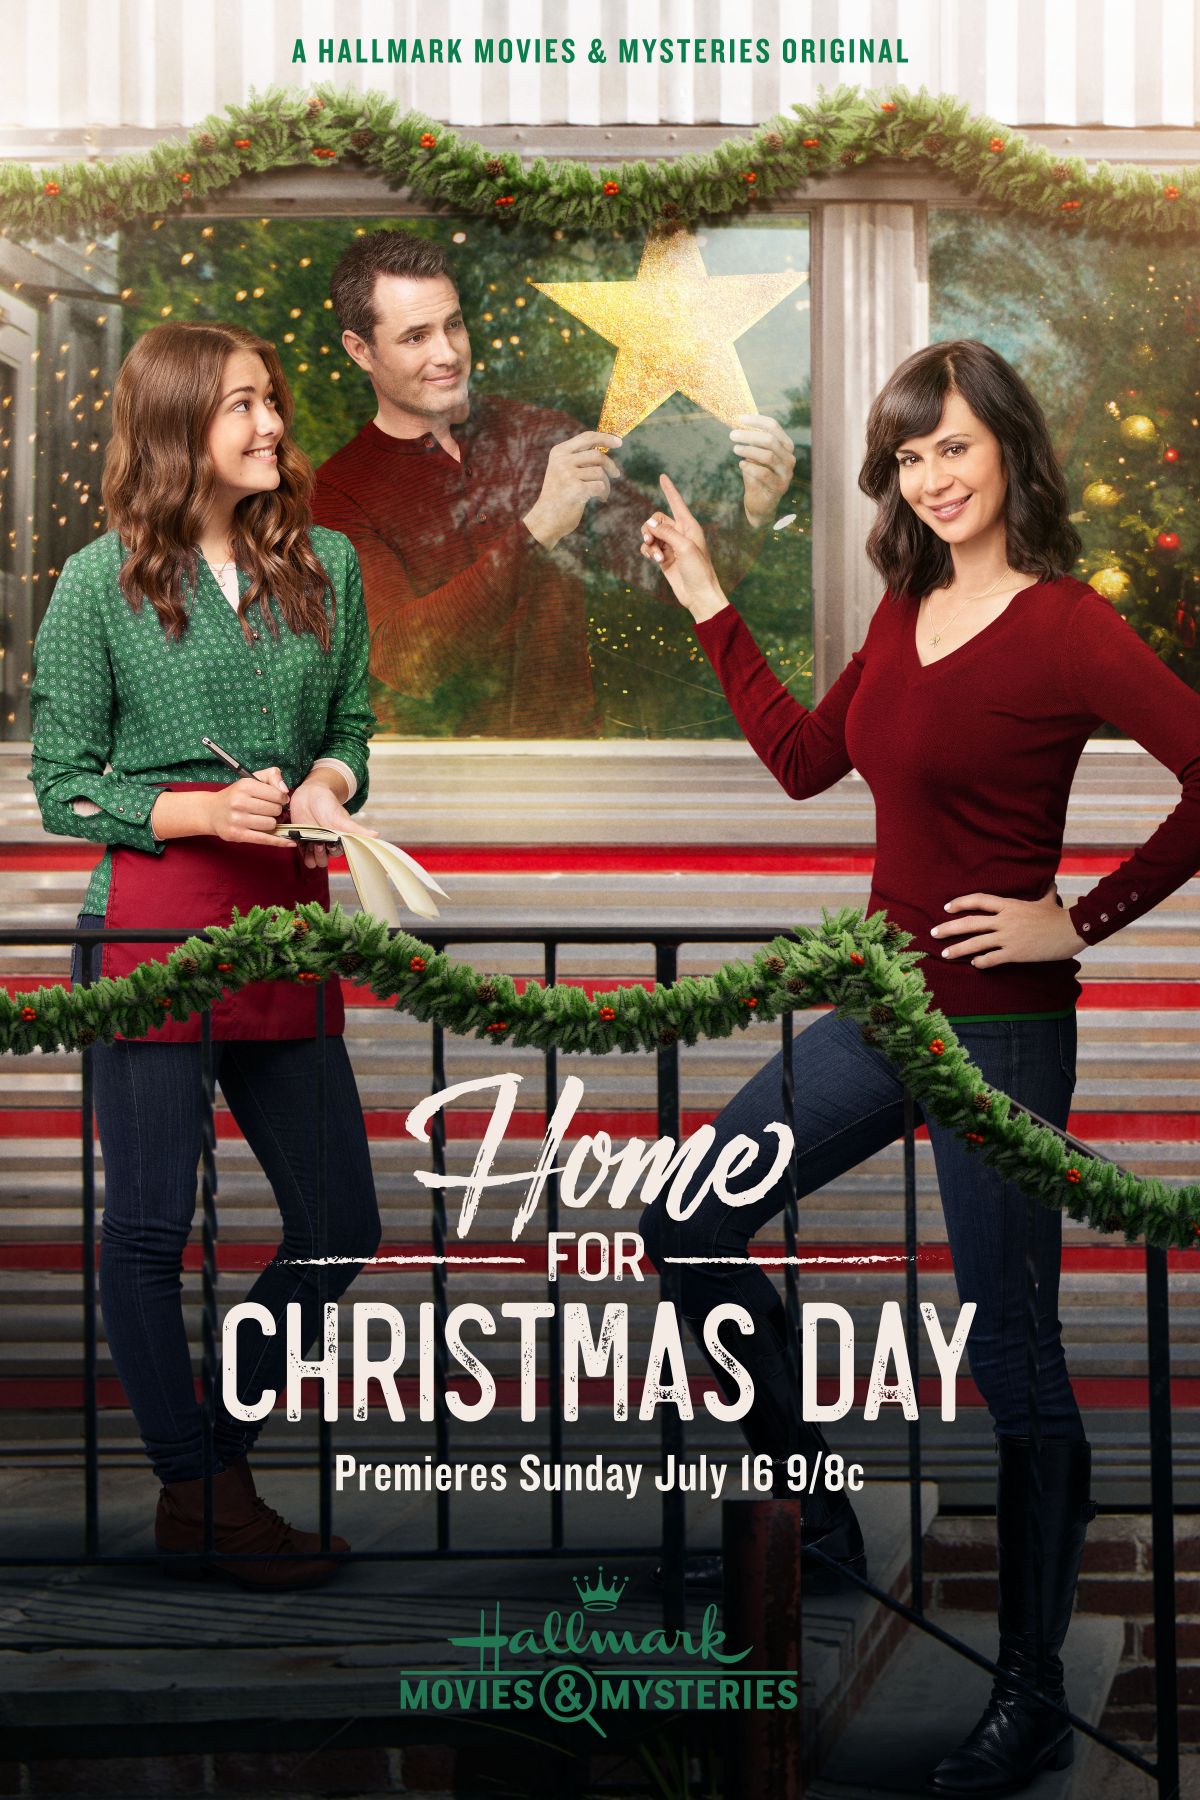 CATHERINE BELL - Home for Christmas Day, 2017 Promos